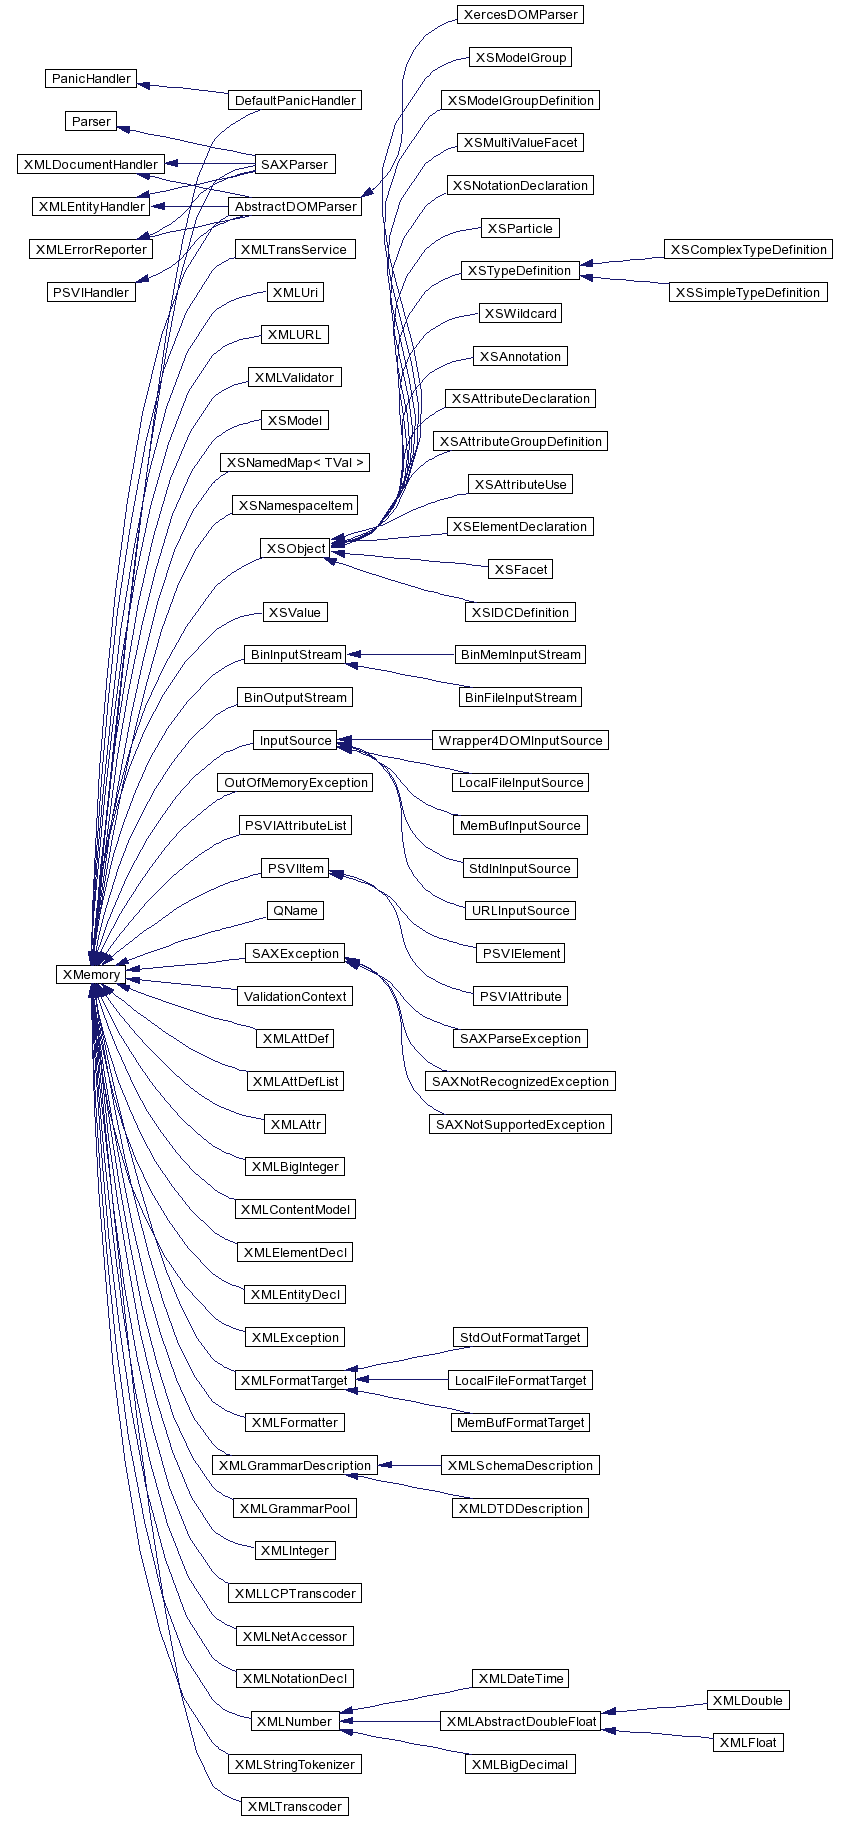 trunk/VUT/GtpVisibilityPreprocessor/support/xerces/doc/html/apiDocs/inherit__graph__41.gif